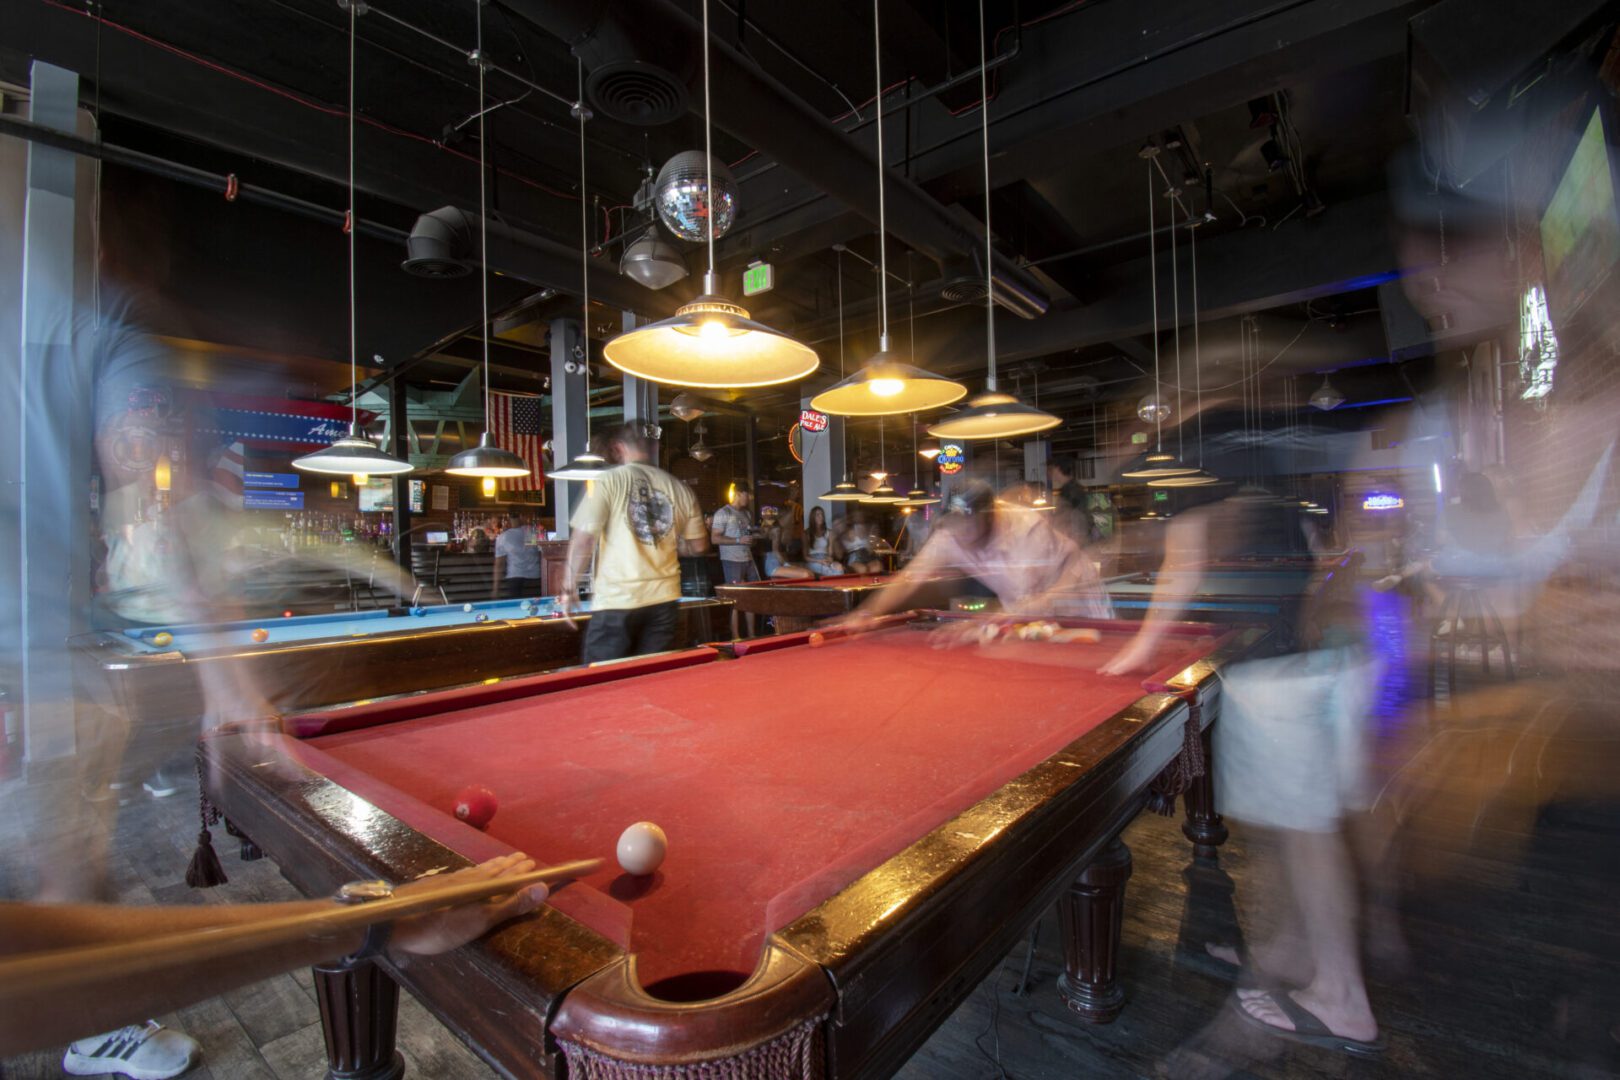 A group of people playing pool in a bar.